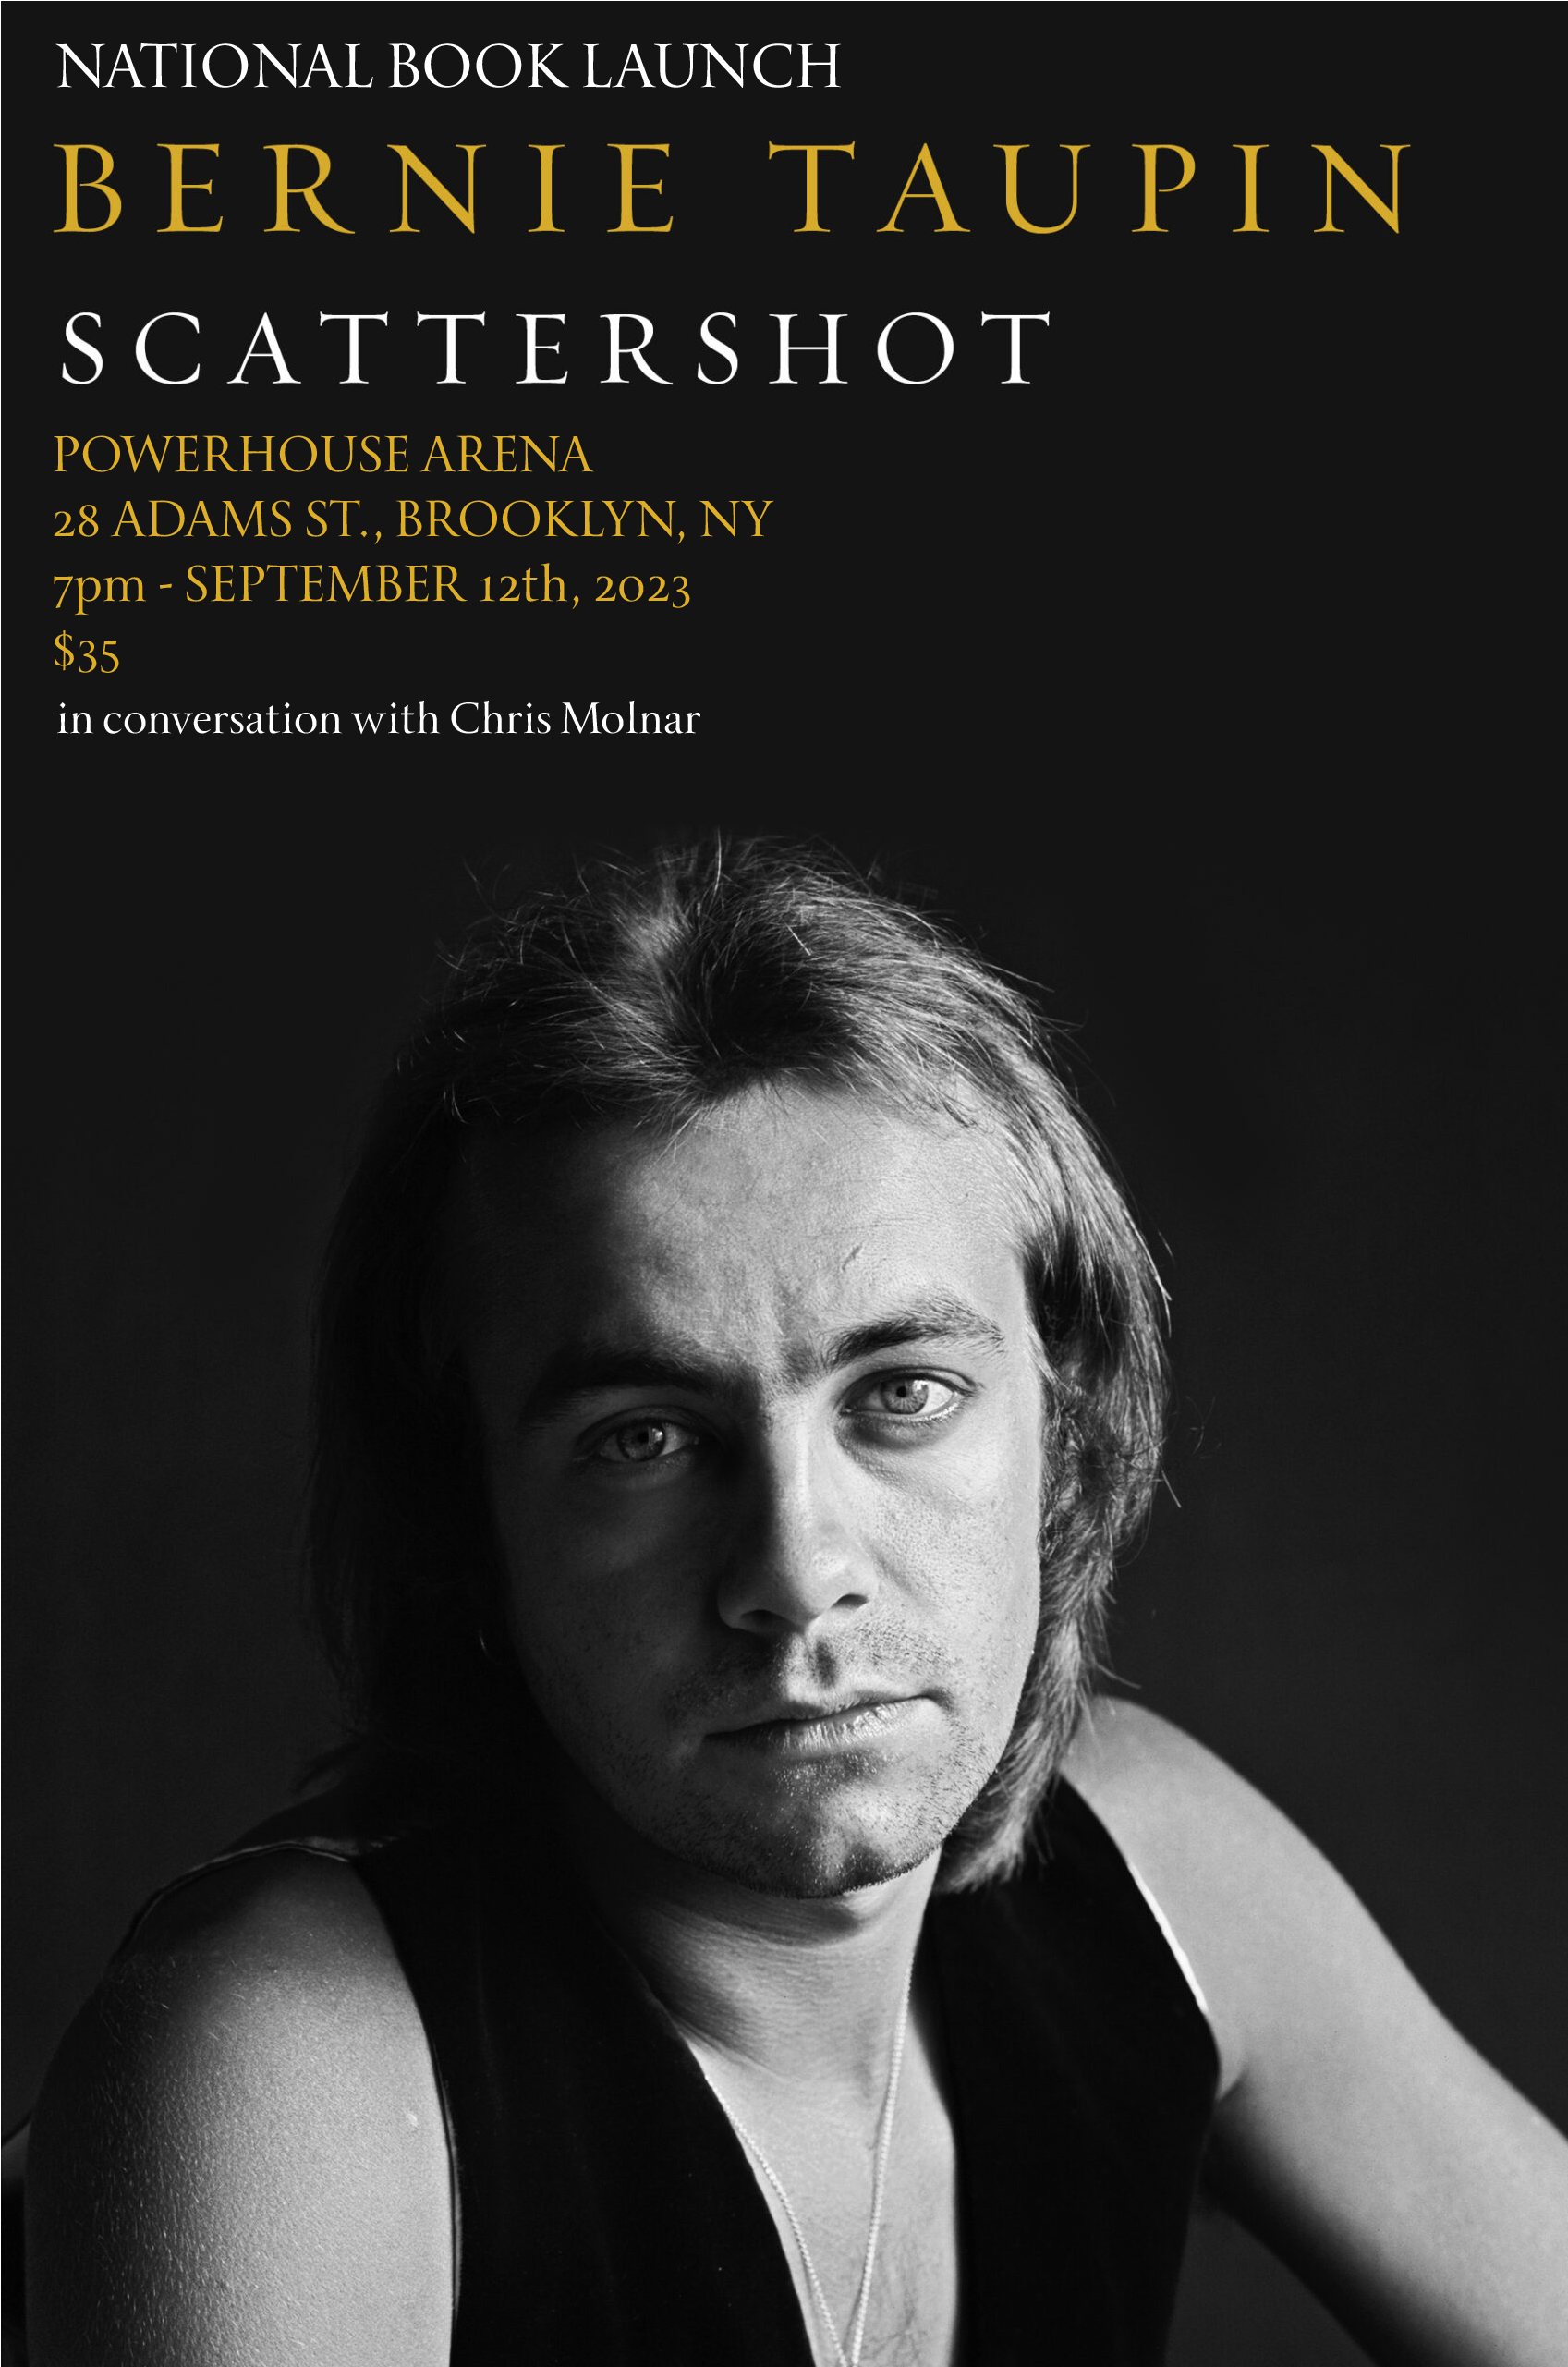 U.S. BOOK LAUNCH: SCATTERSHOT by Bernie Taupin in conversation with Chris Molnar